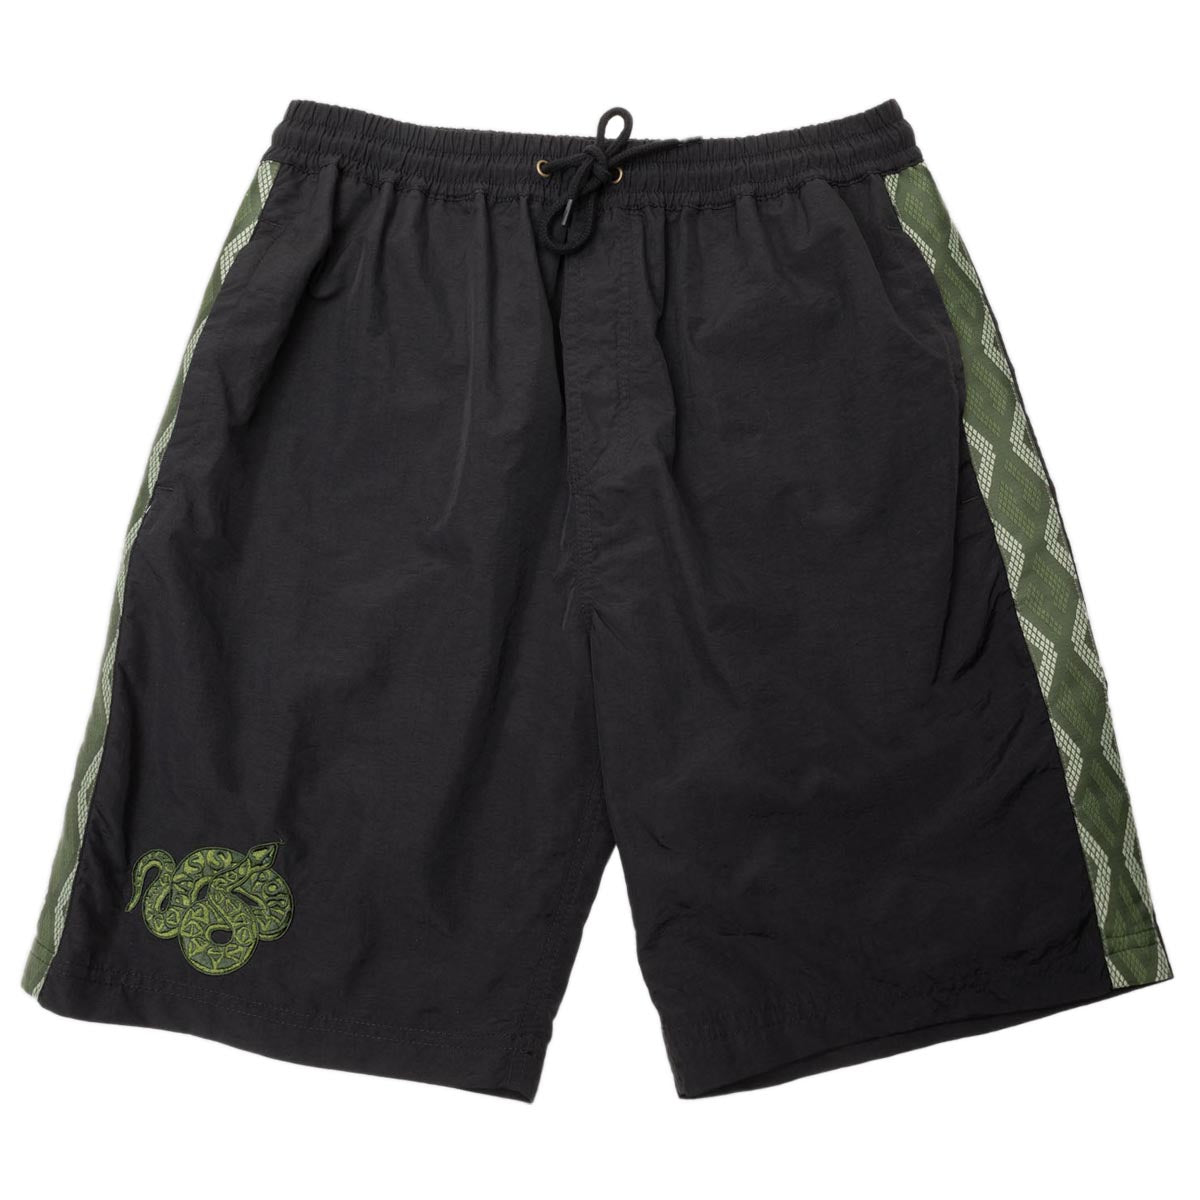 Passport Coiled RPET Casual Shorts - Black image 1